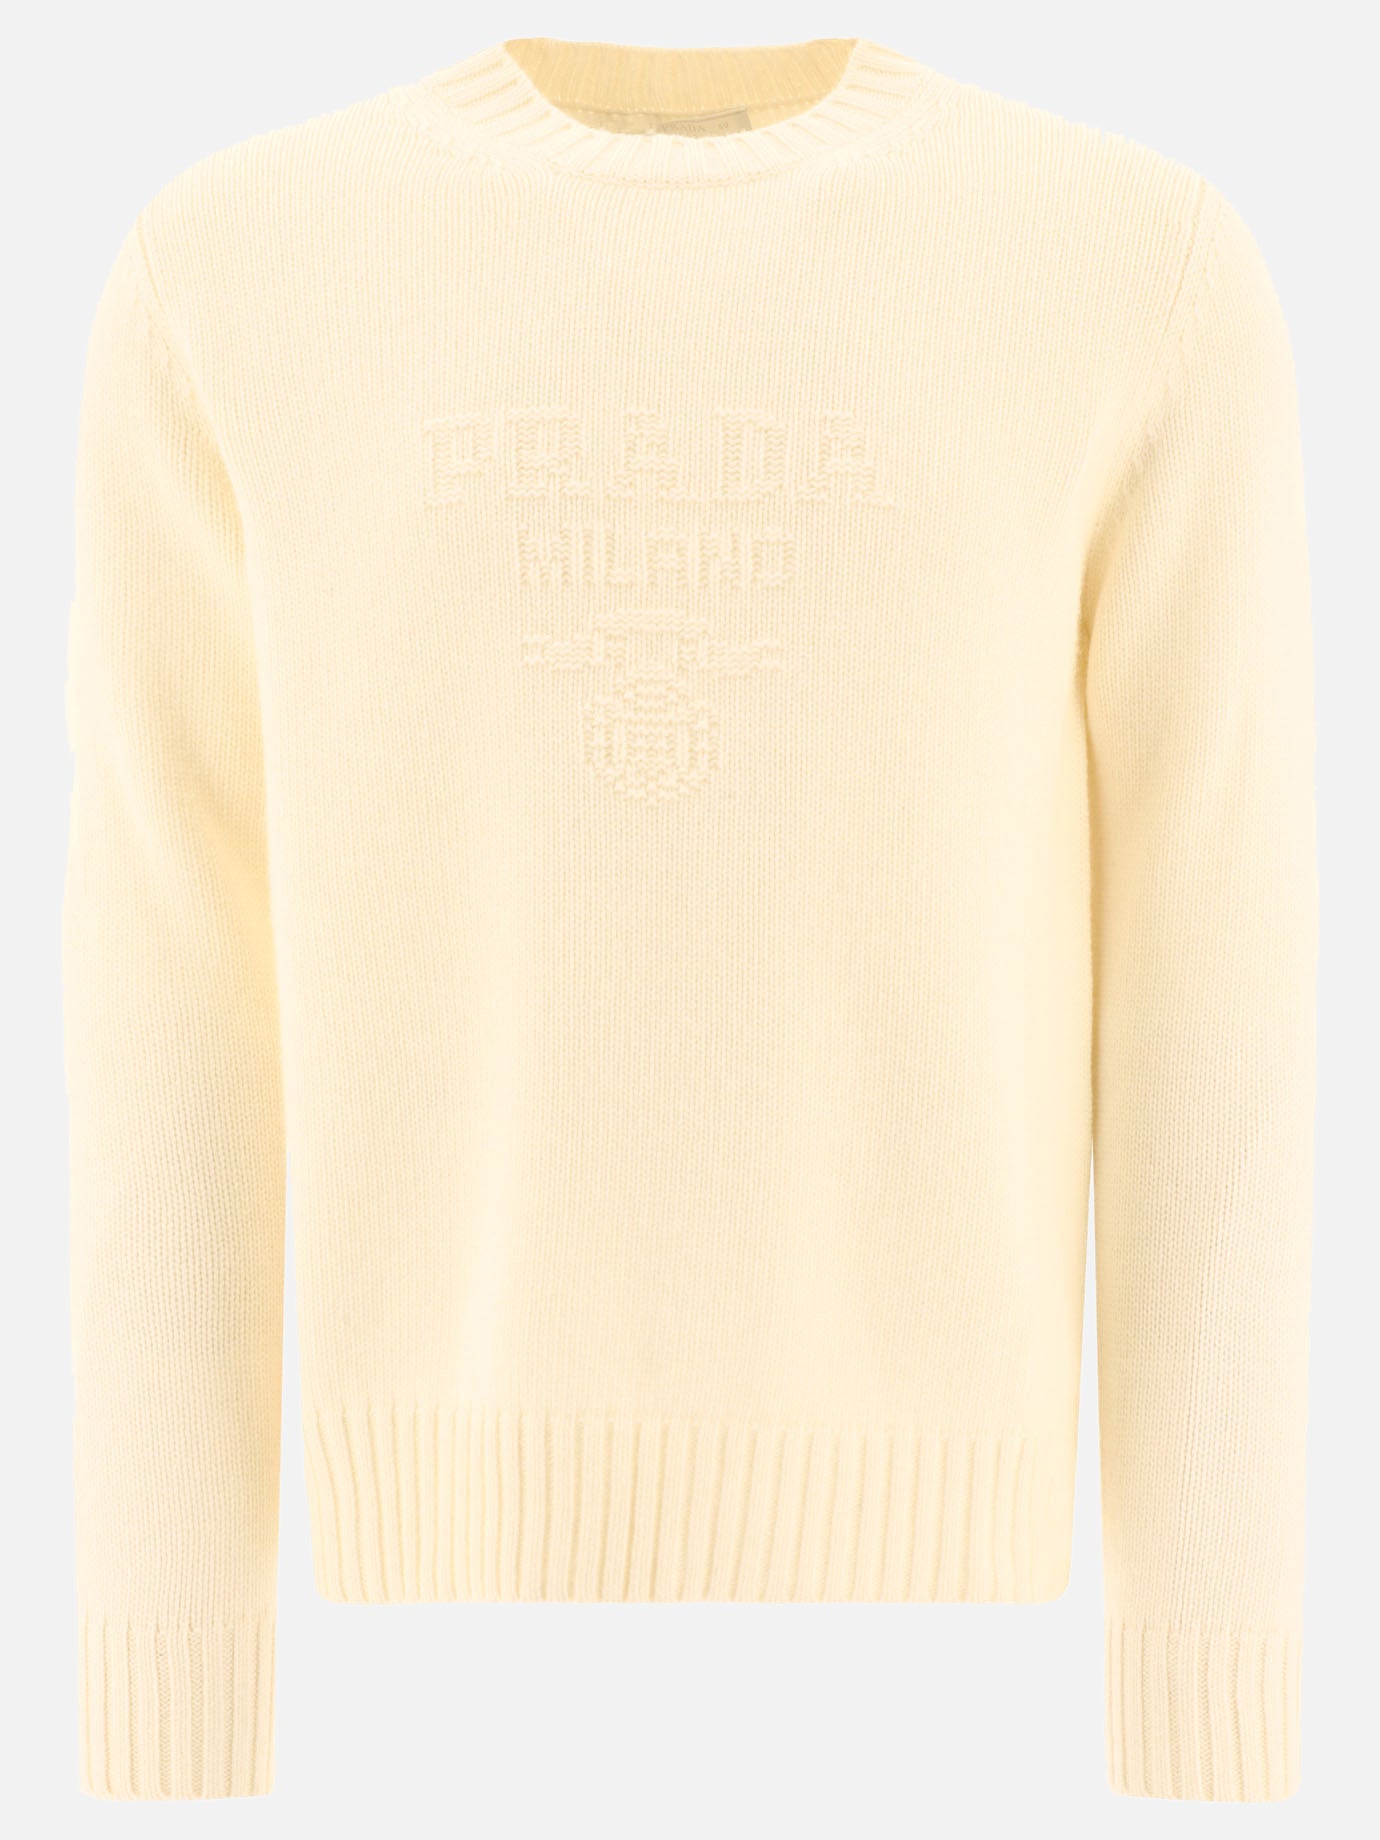 Wool and cashmere crewneck sweater